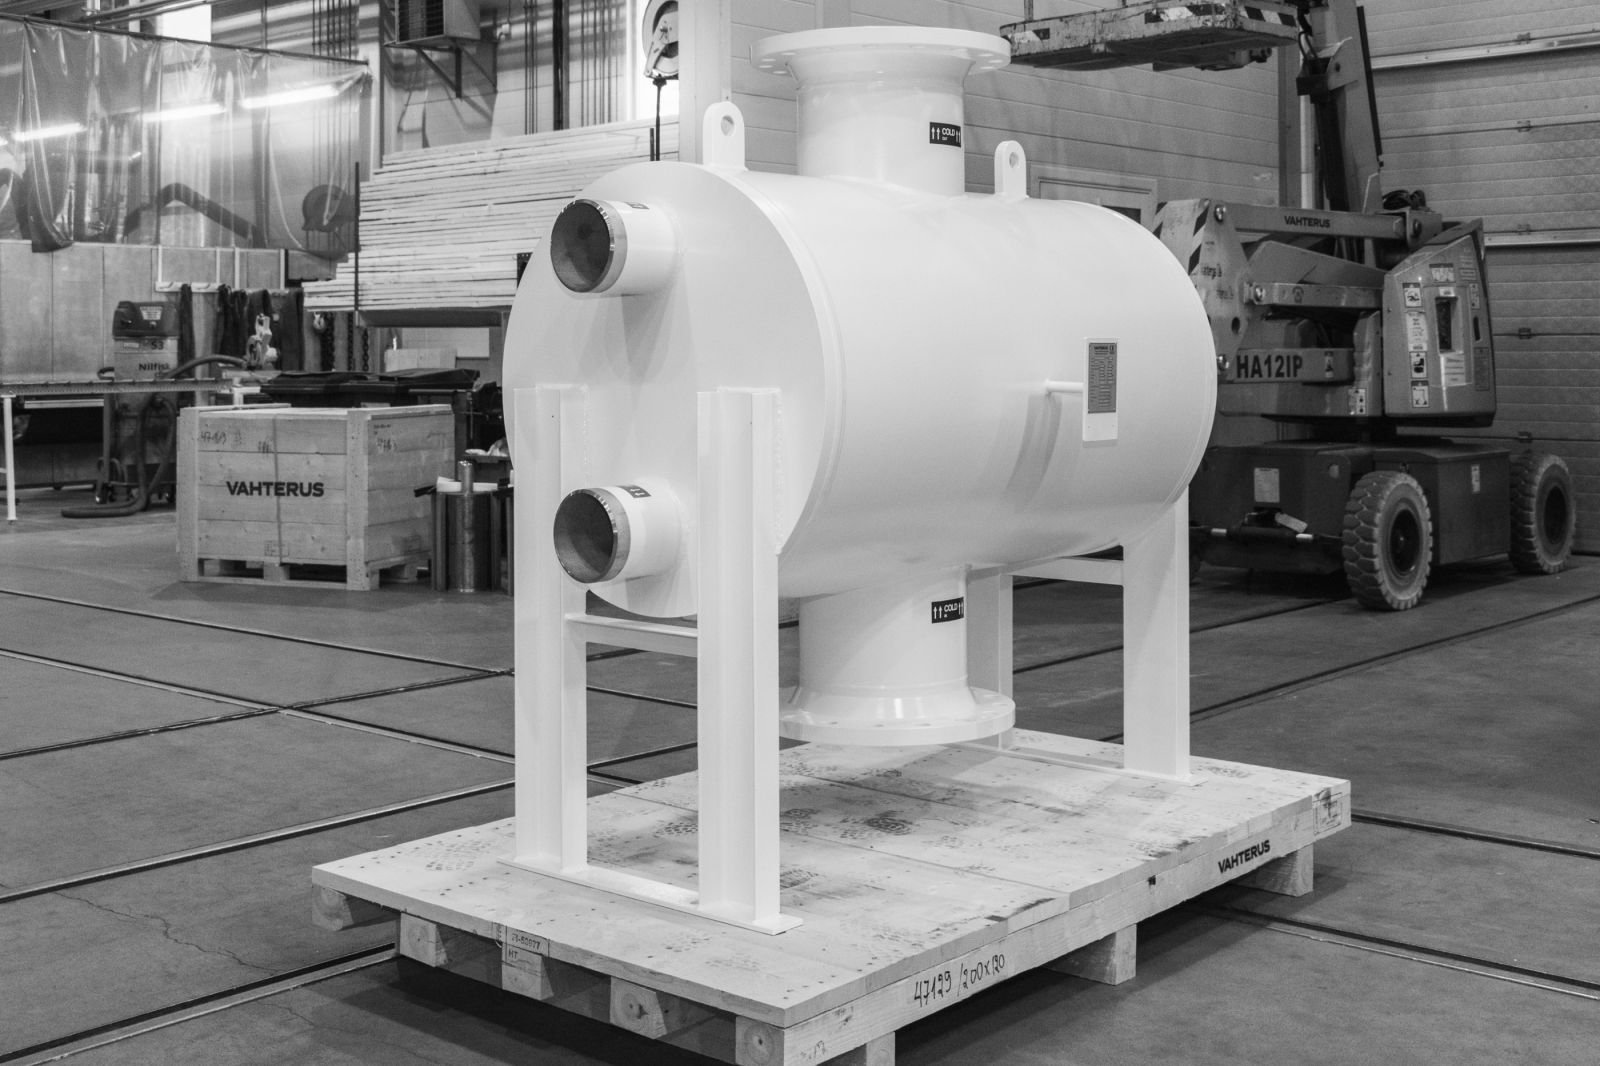 Pölkky replaced an old tube heat exchanger in Taivalkoski production unit with a fully welded 12-MW Vahterus Plate & Shell heat exchanger. The compact size makes it easier to install in a production plant.